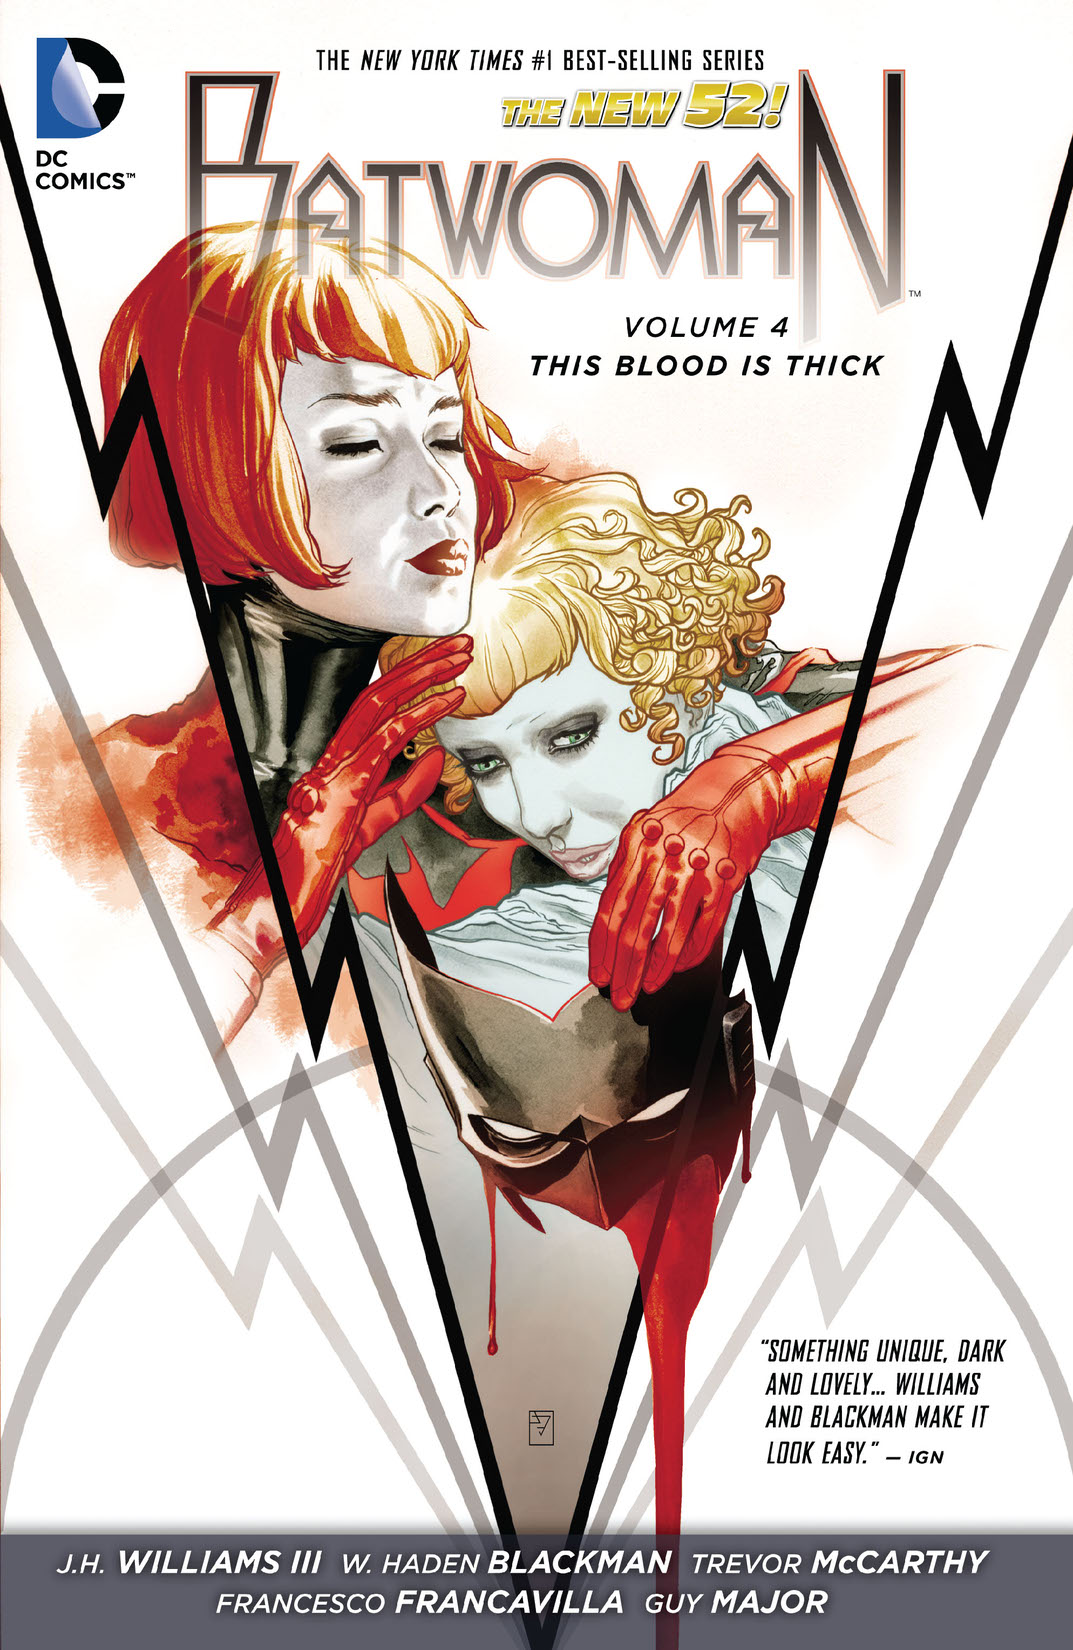 Batwoman Vol. 4: This Blood is Thick preview images